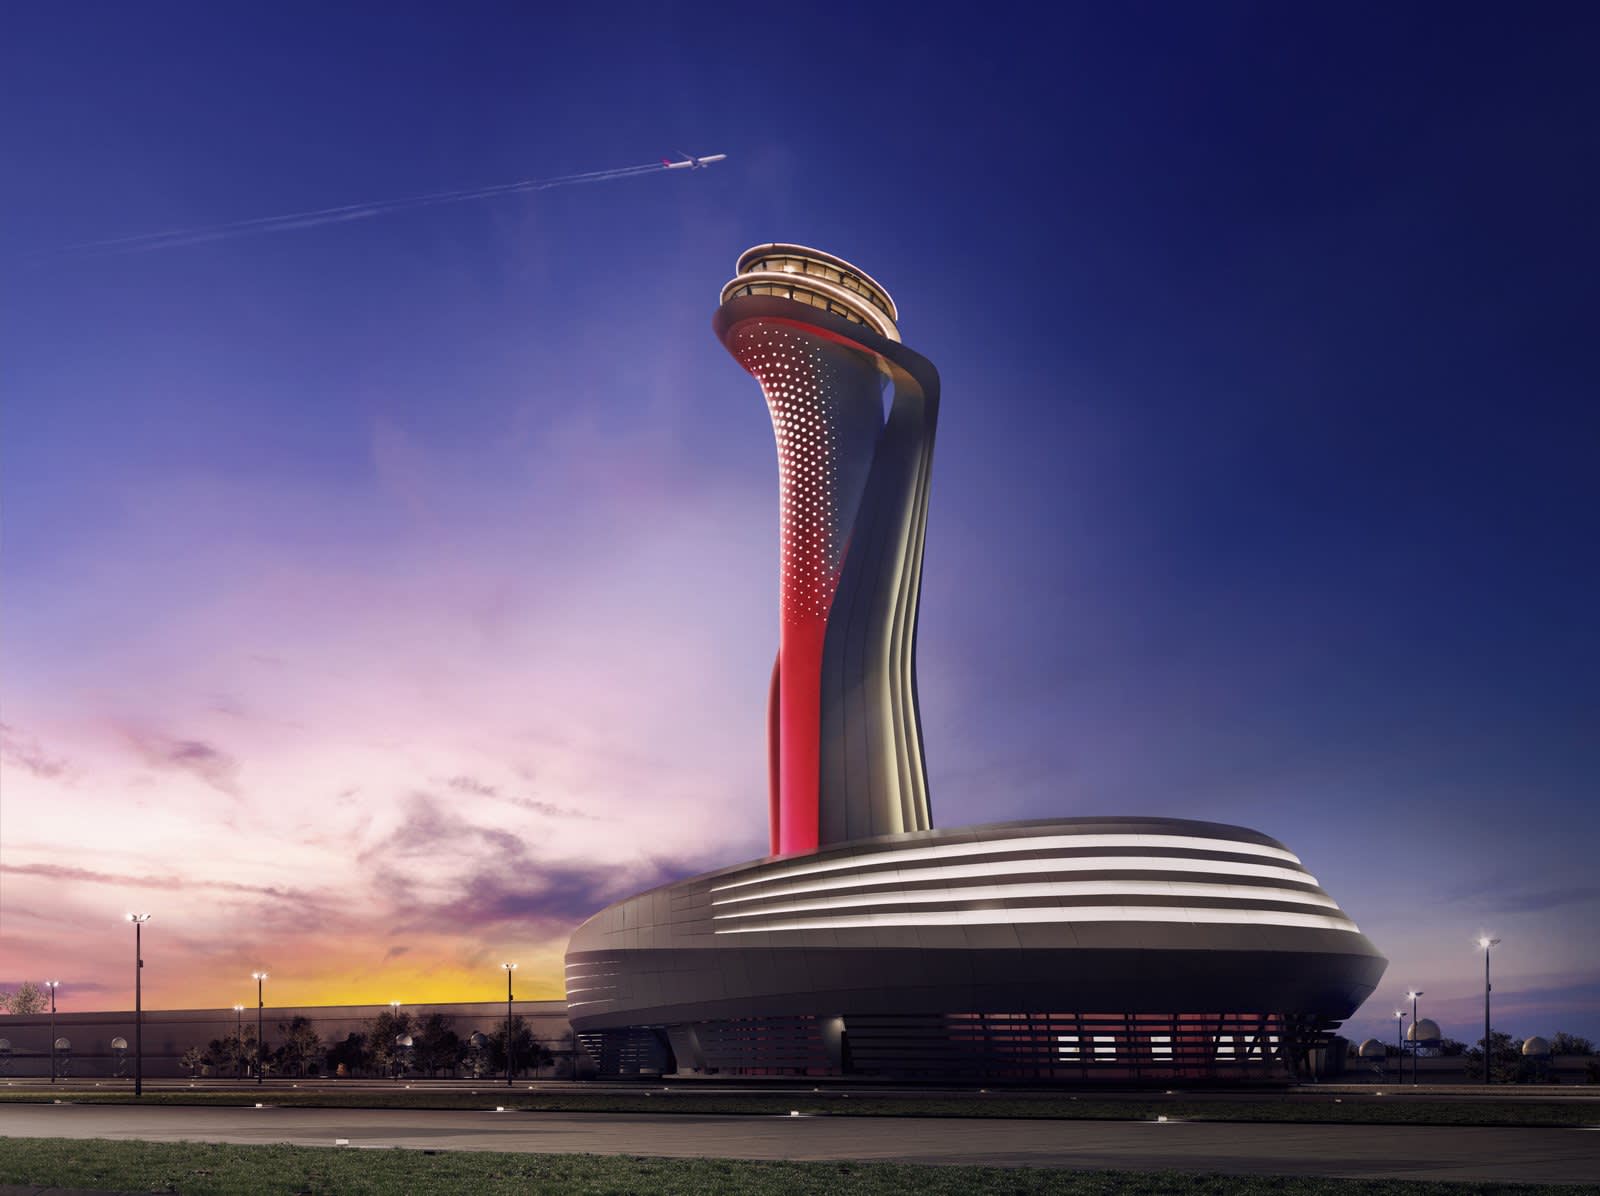 Is Istanbul the largest airport in the world?